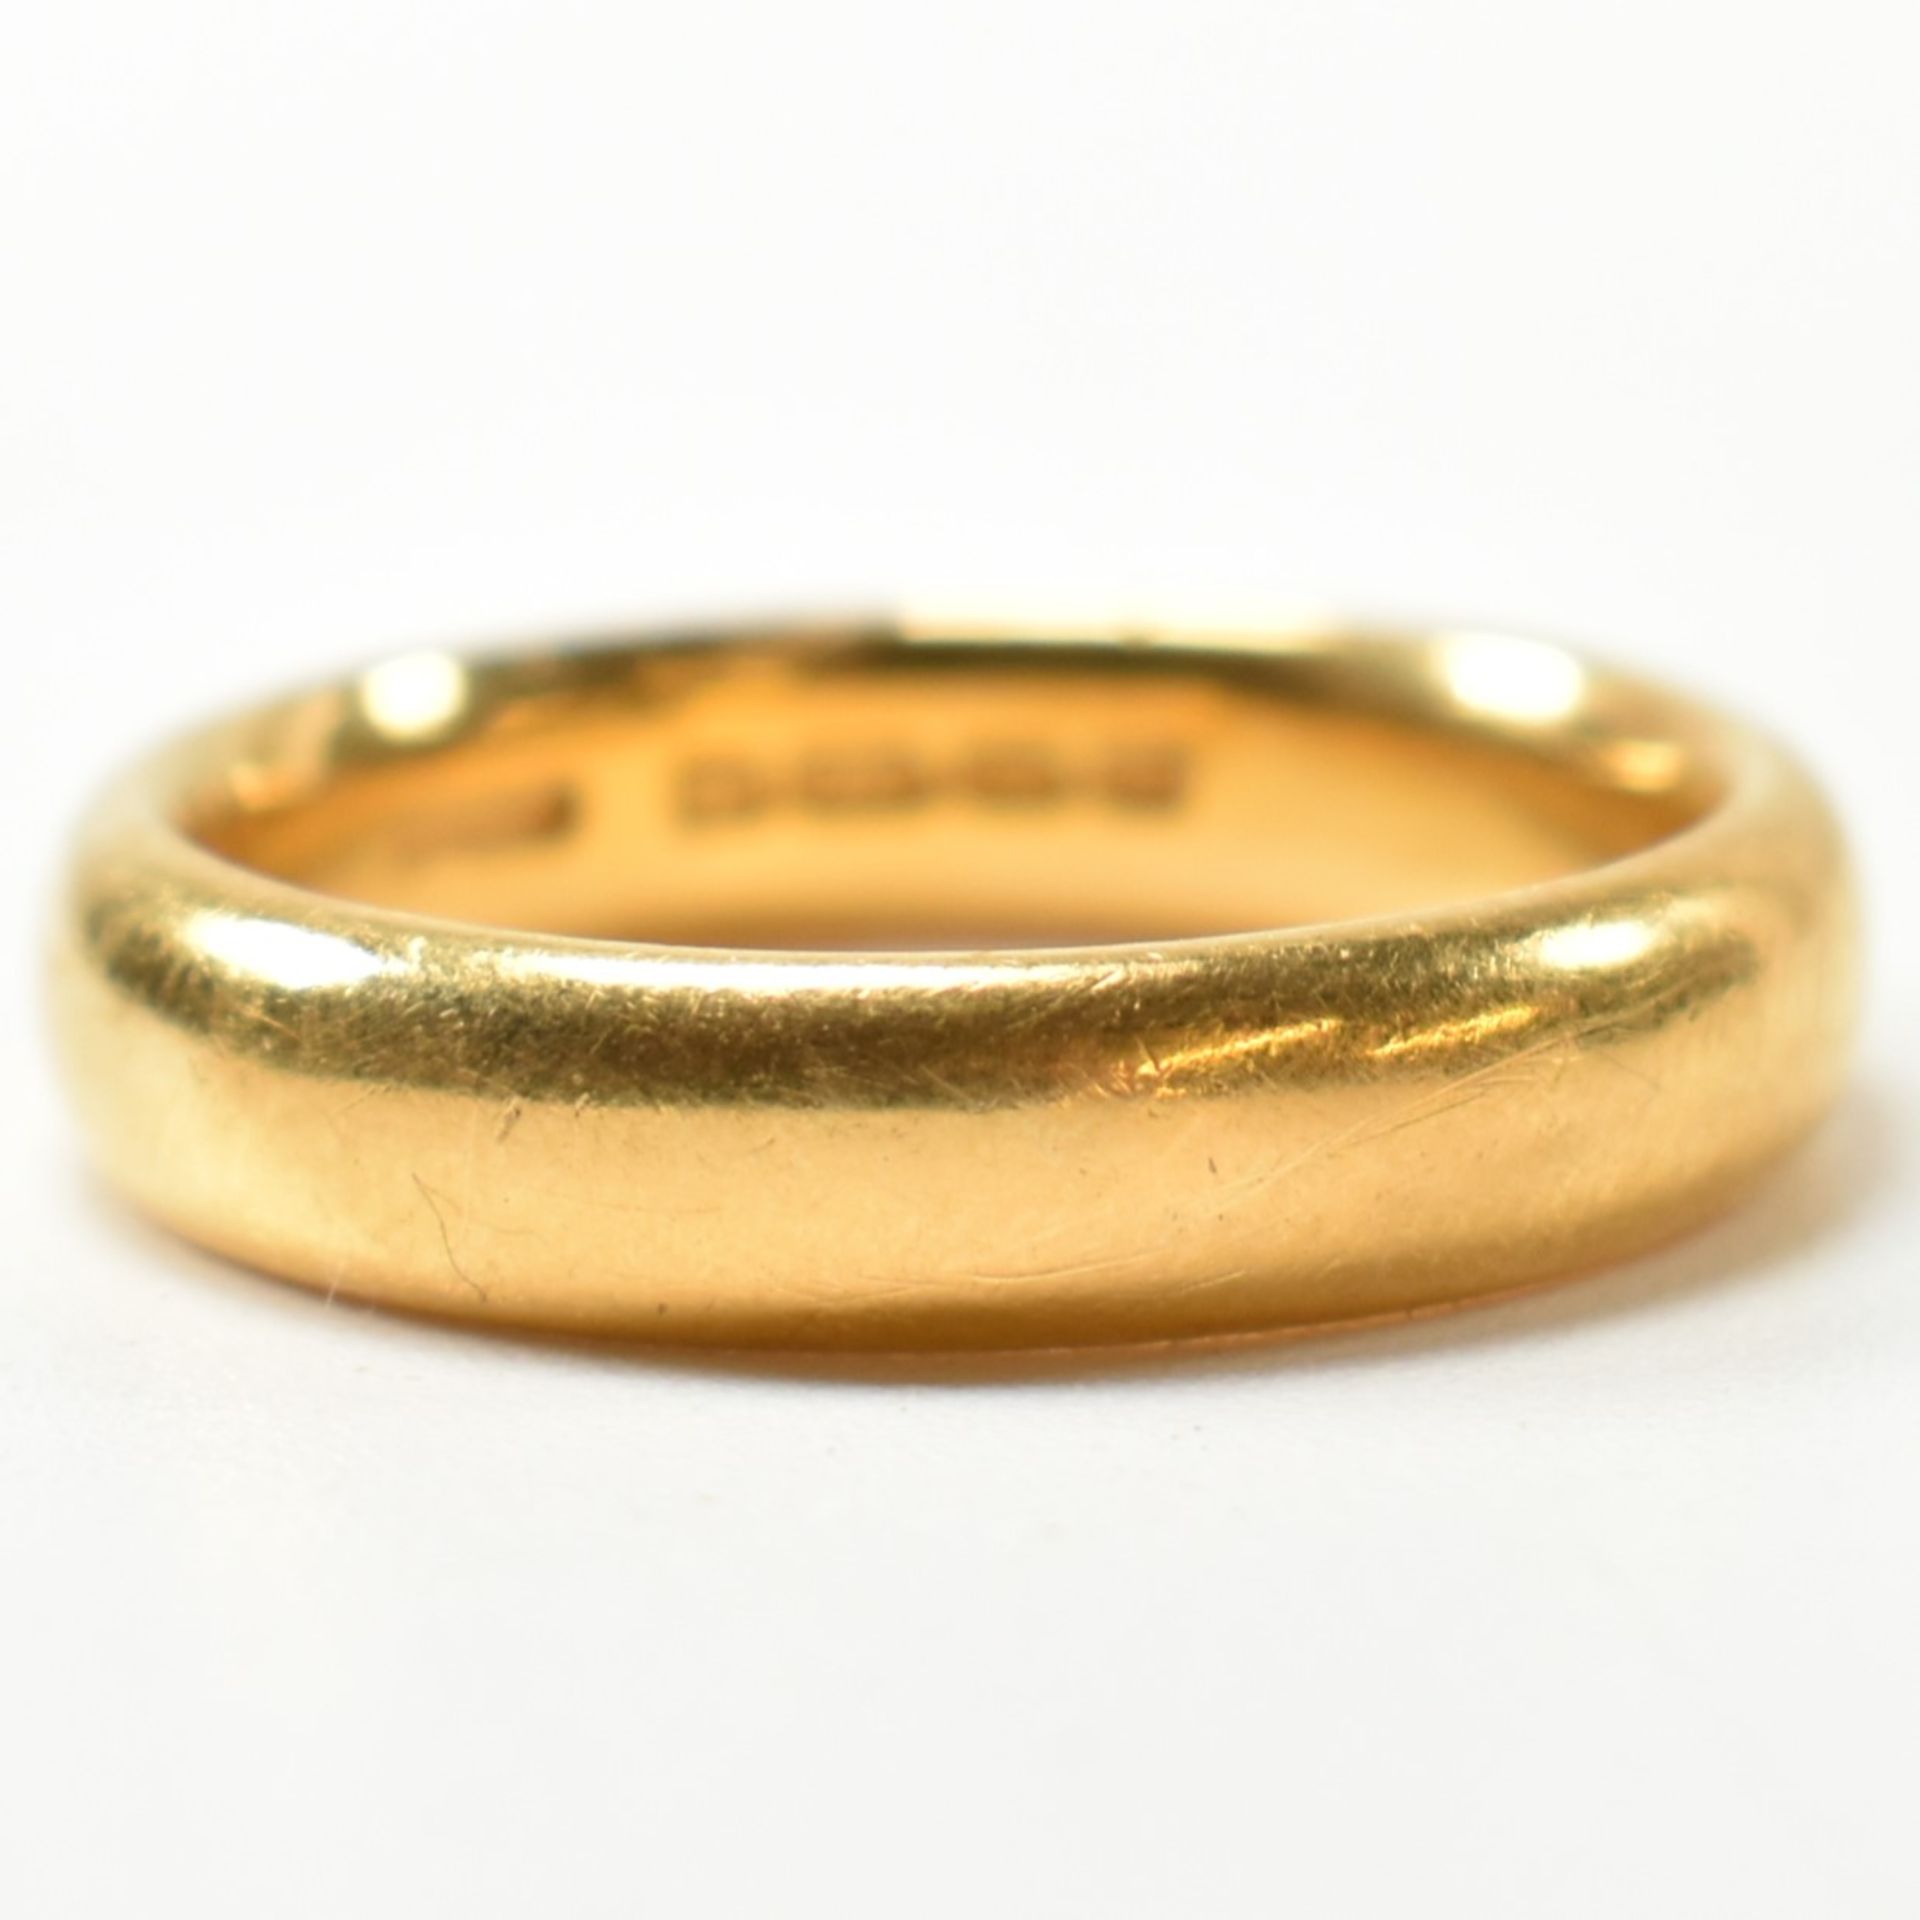 HALLMARKED 22CT GOLD BAND RING - Image 4 of 5